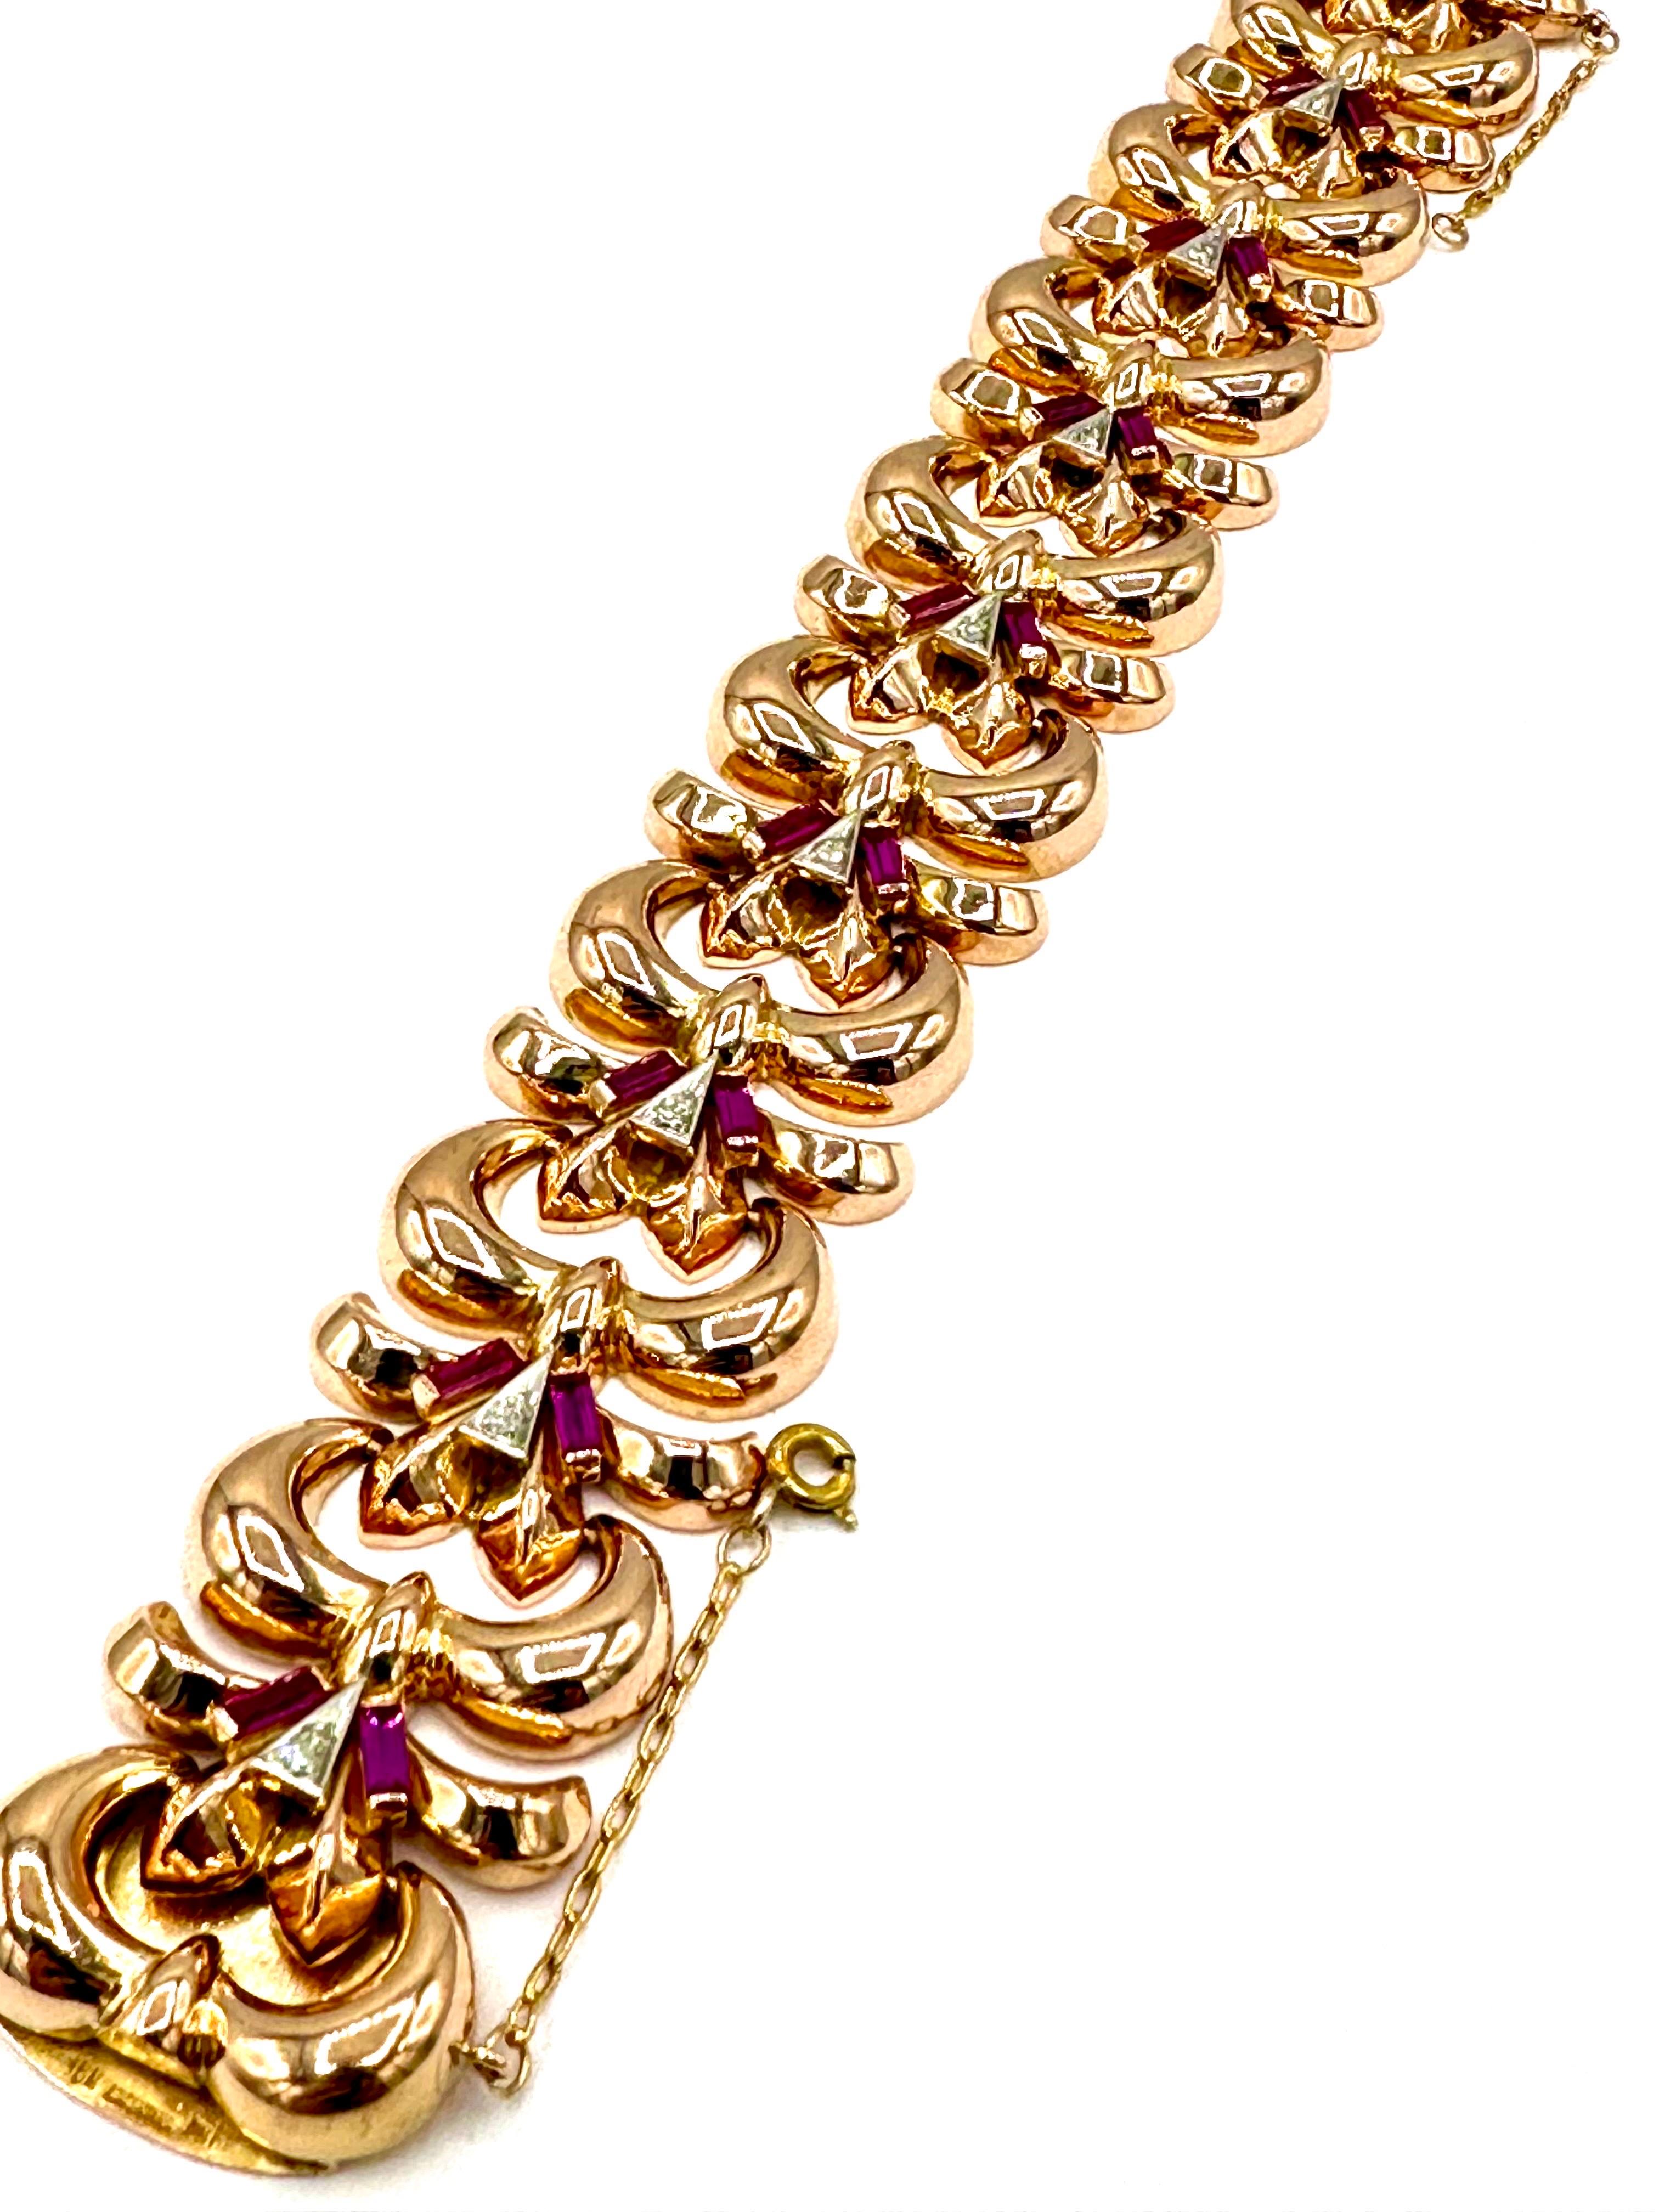 A beautiful retro single cut Diamond and synthetic Ruby bracelet.  There are nine single cut round Diamonds that total 0.31 carats, set with a single  baguette cut synthetic Ruby on each side.  The links are a curved Fleur De Lis style made in 18K